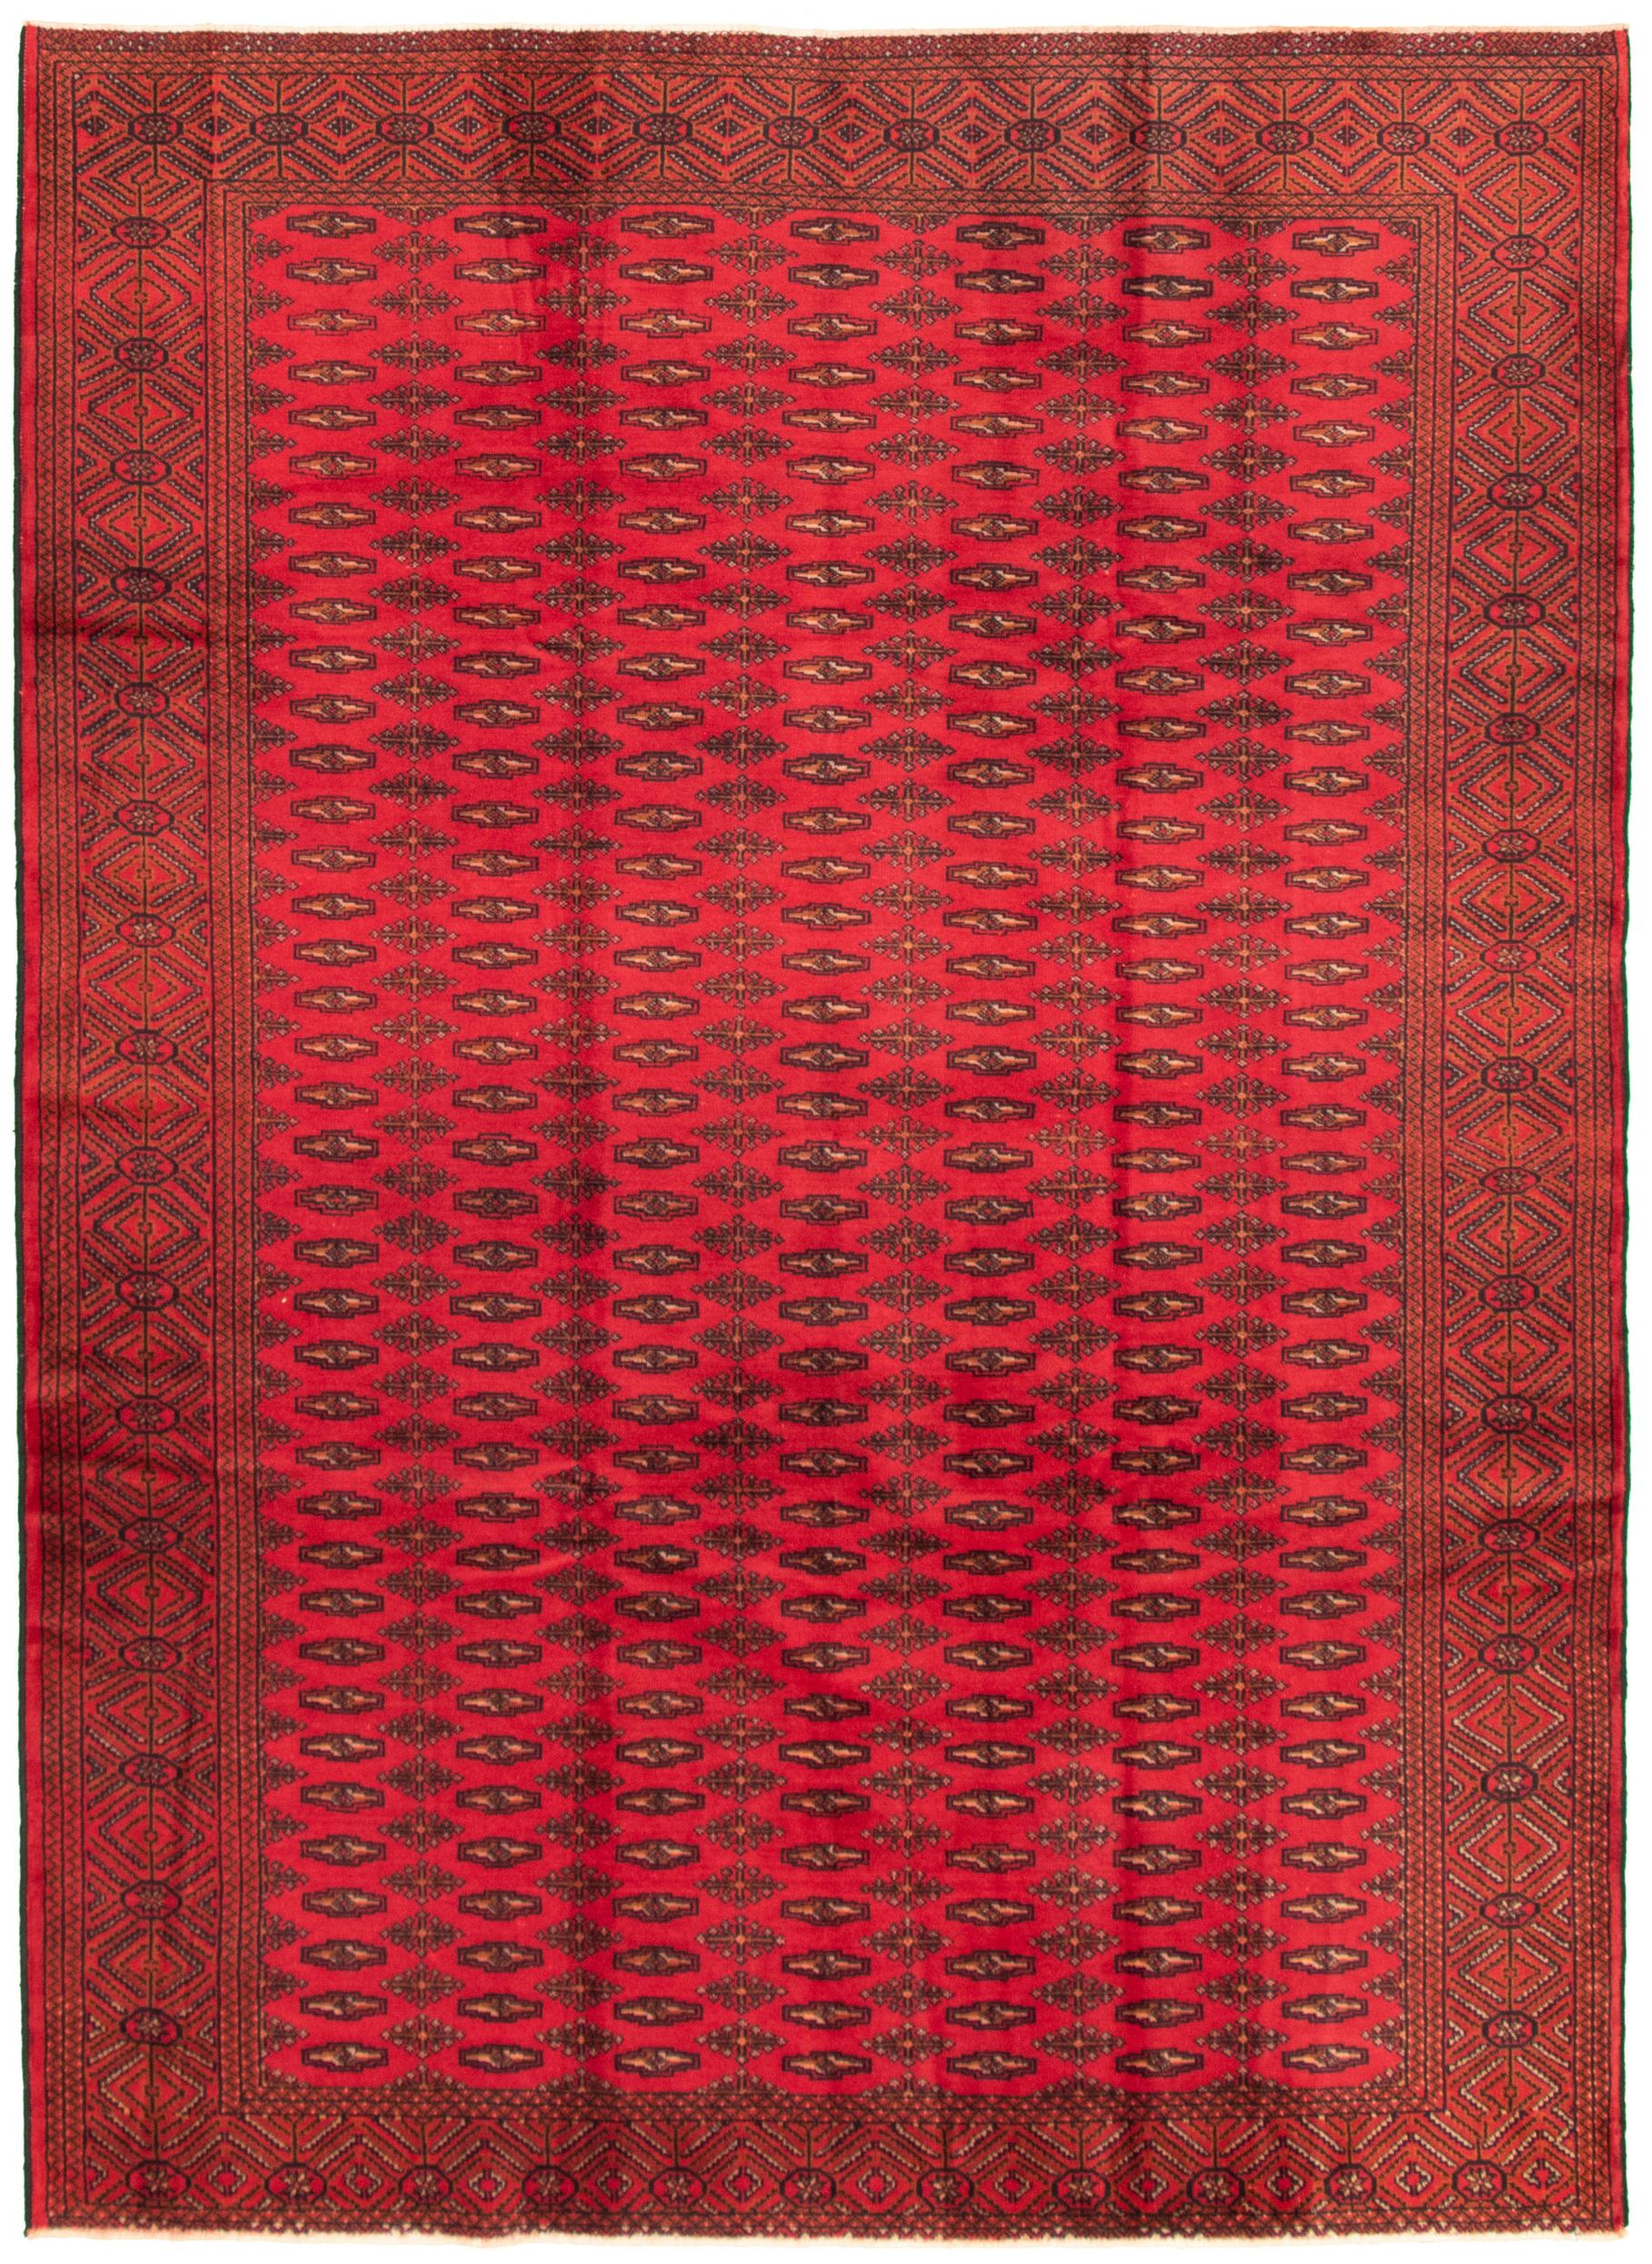 Hand-knotted Khal Mohammadi Red Wool Rug 6'7" x 9'2"  Size: 6'7" x 9'2"  